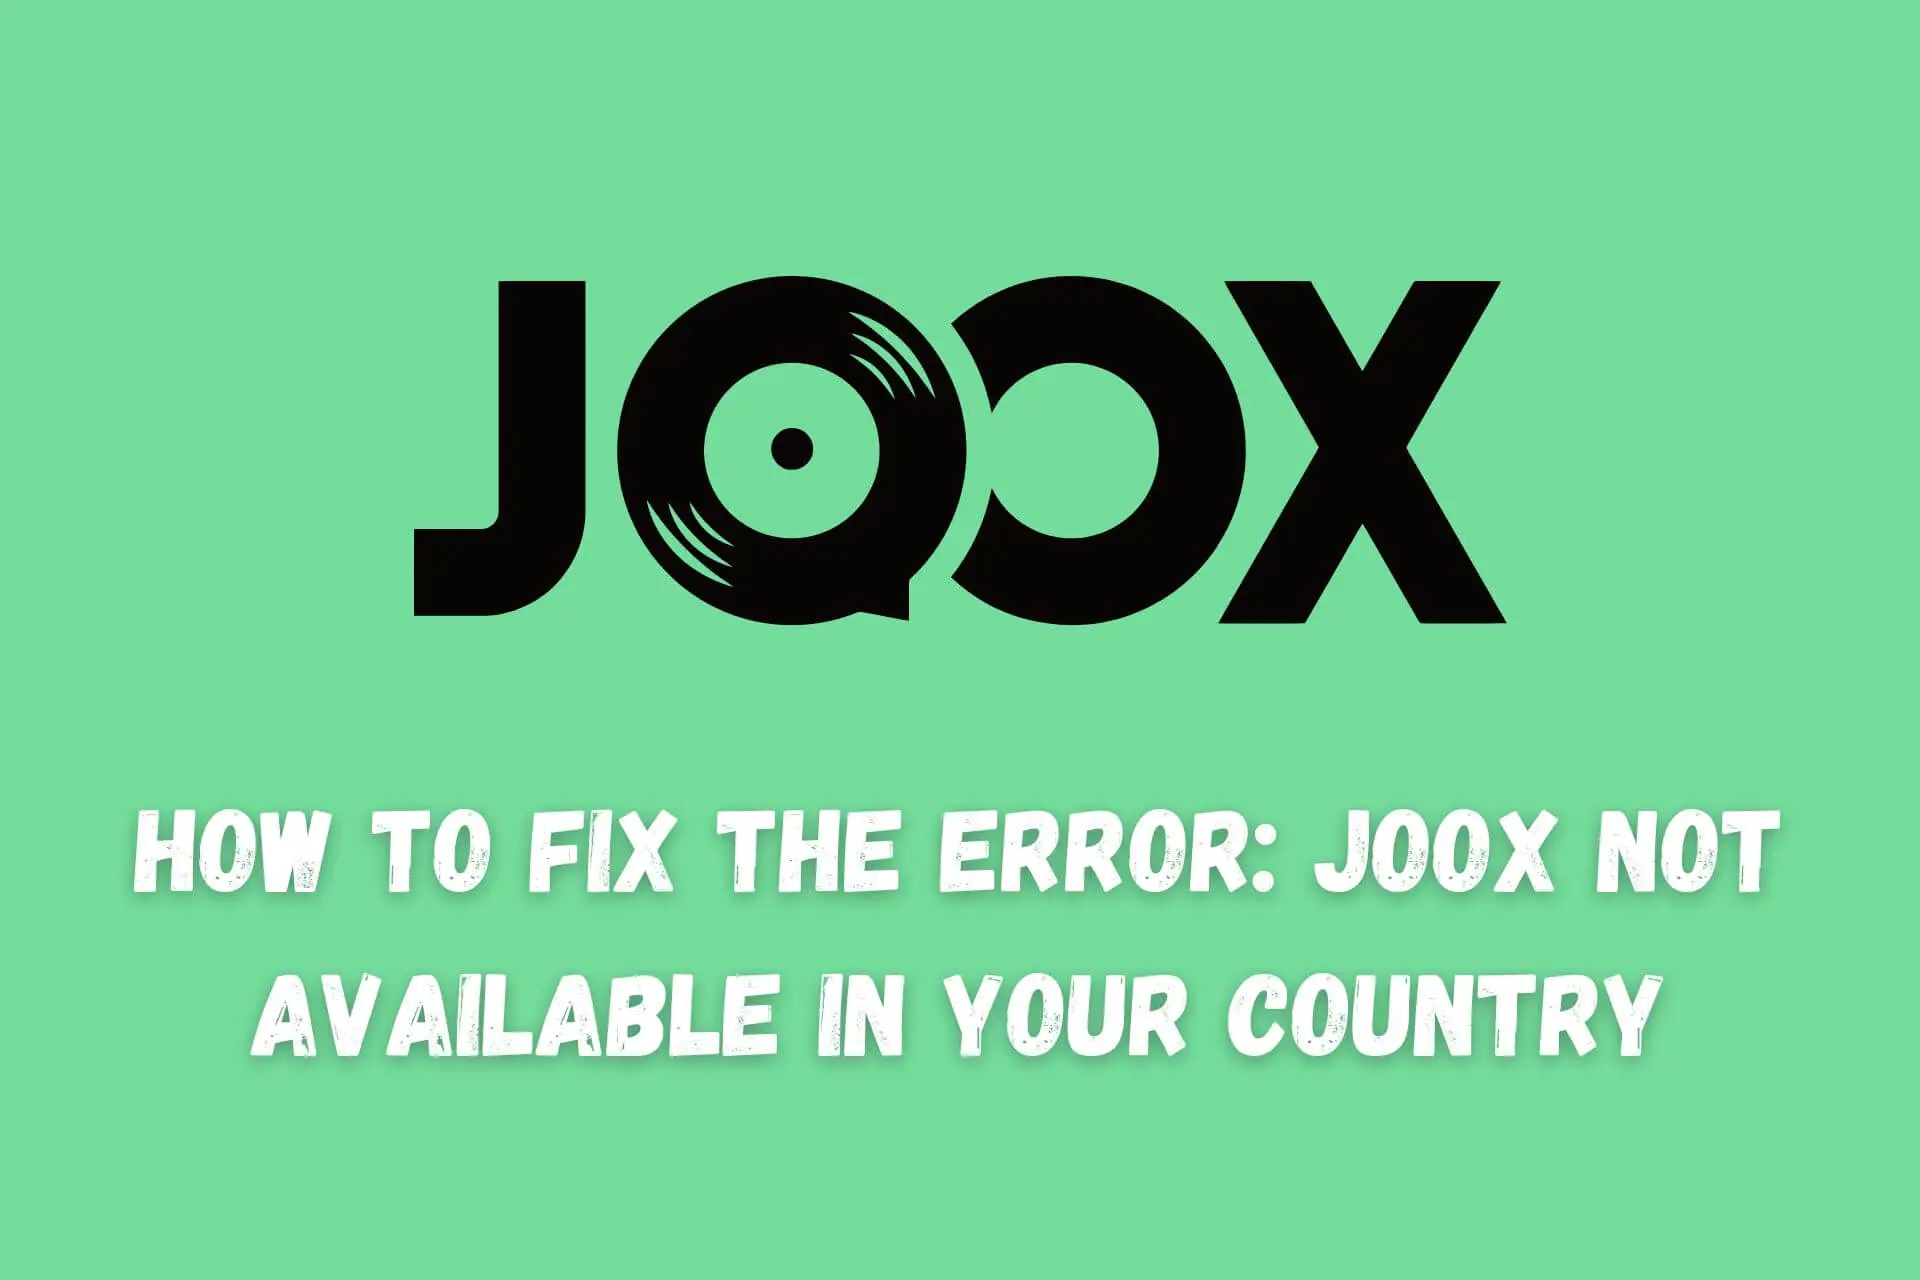 joox not available in your country